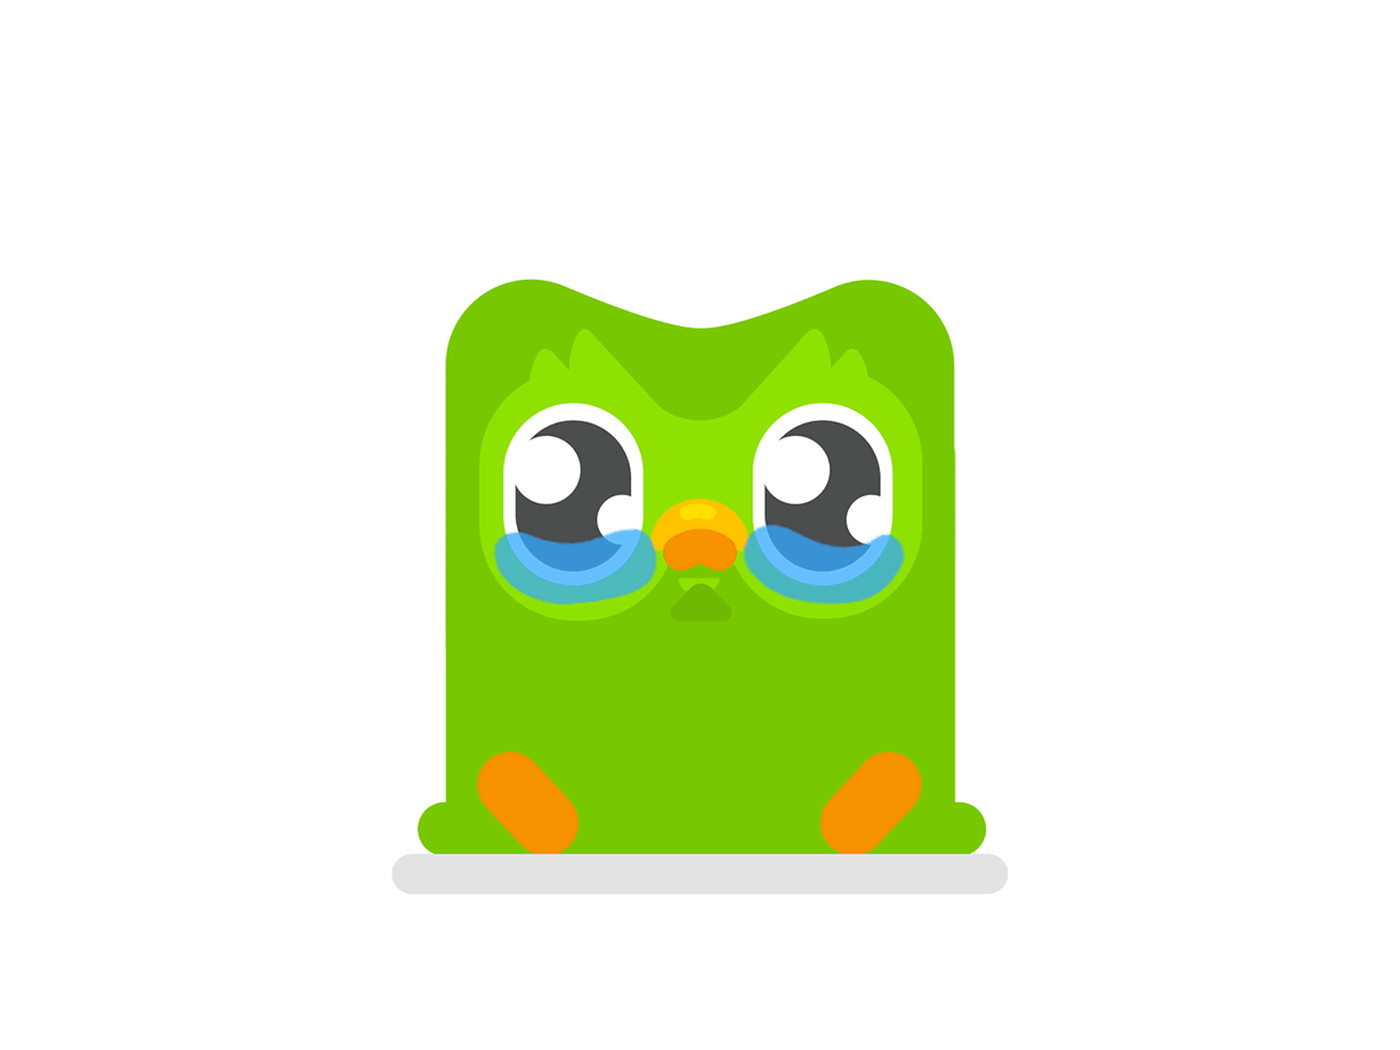 Duolingo Redesigned Its Owl To Guilt Trip You Even Harder The Verge